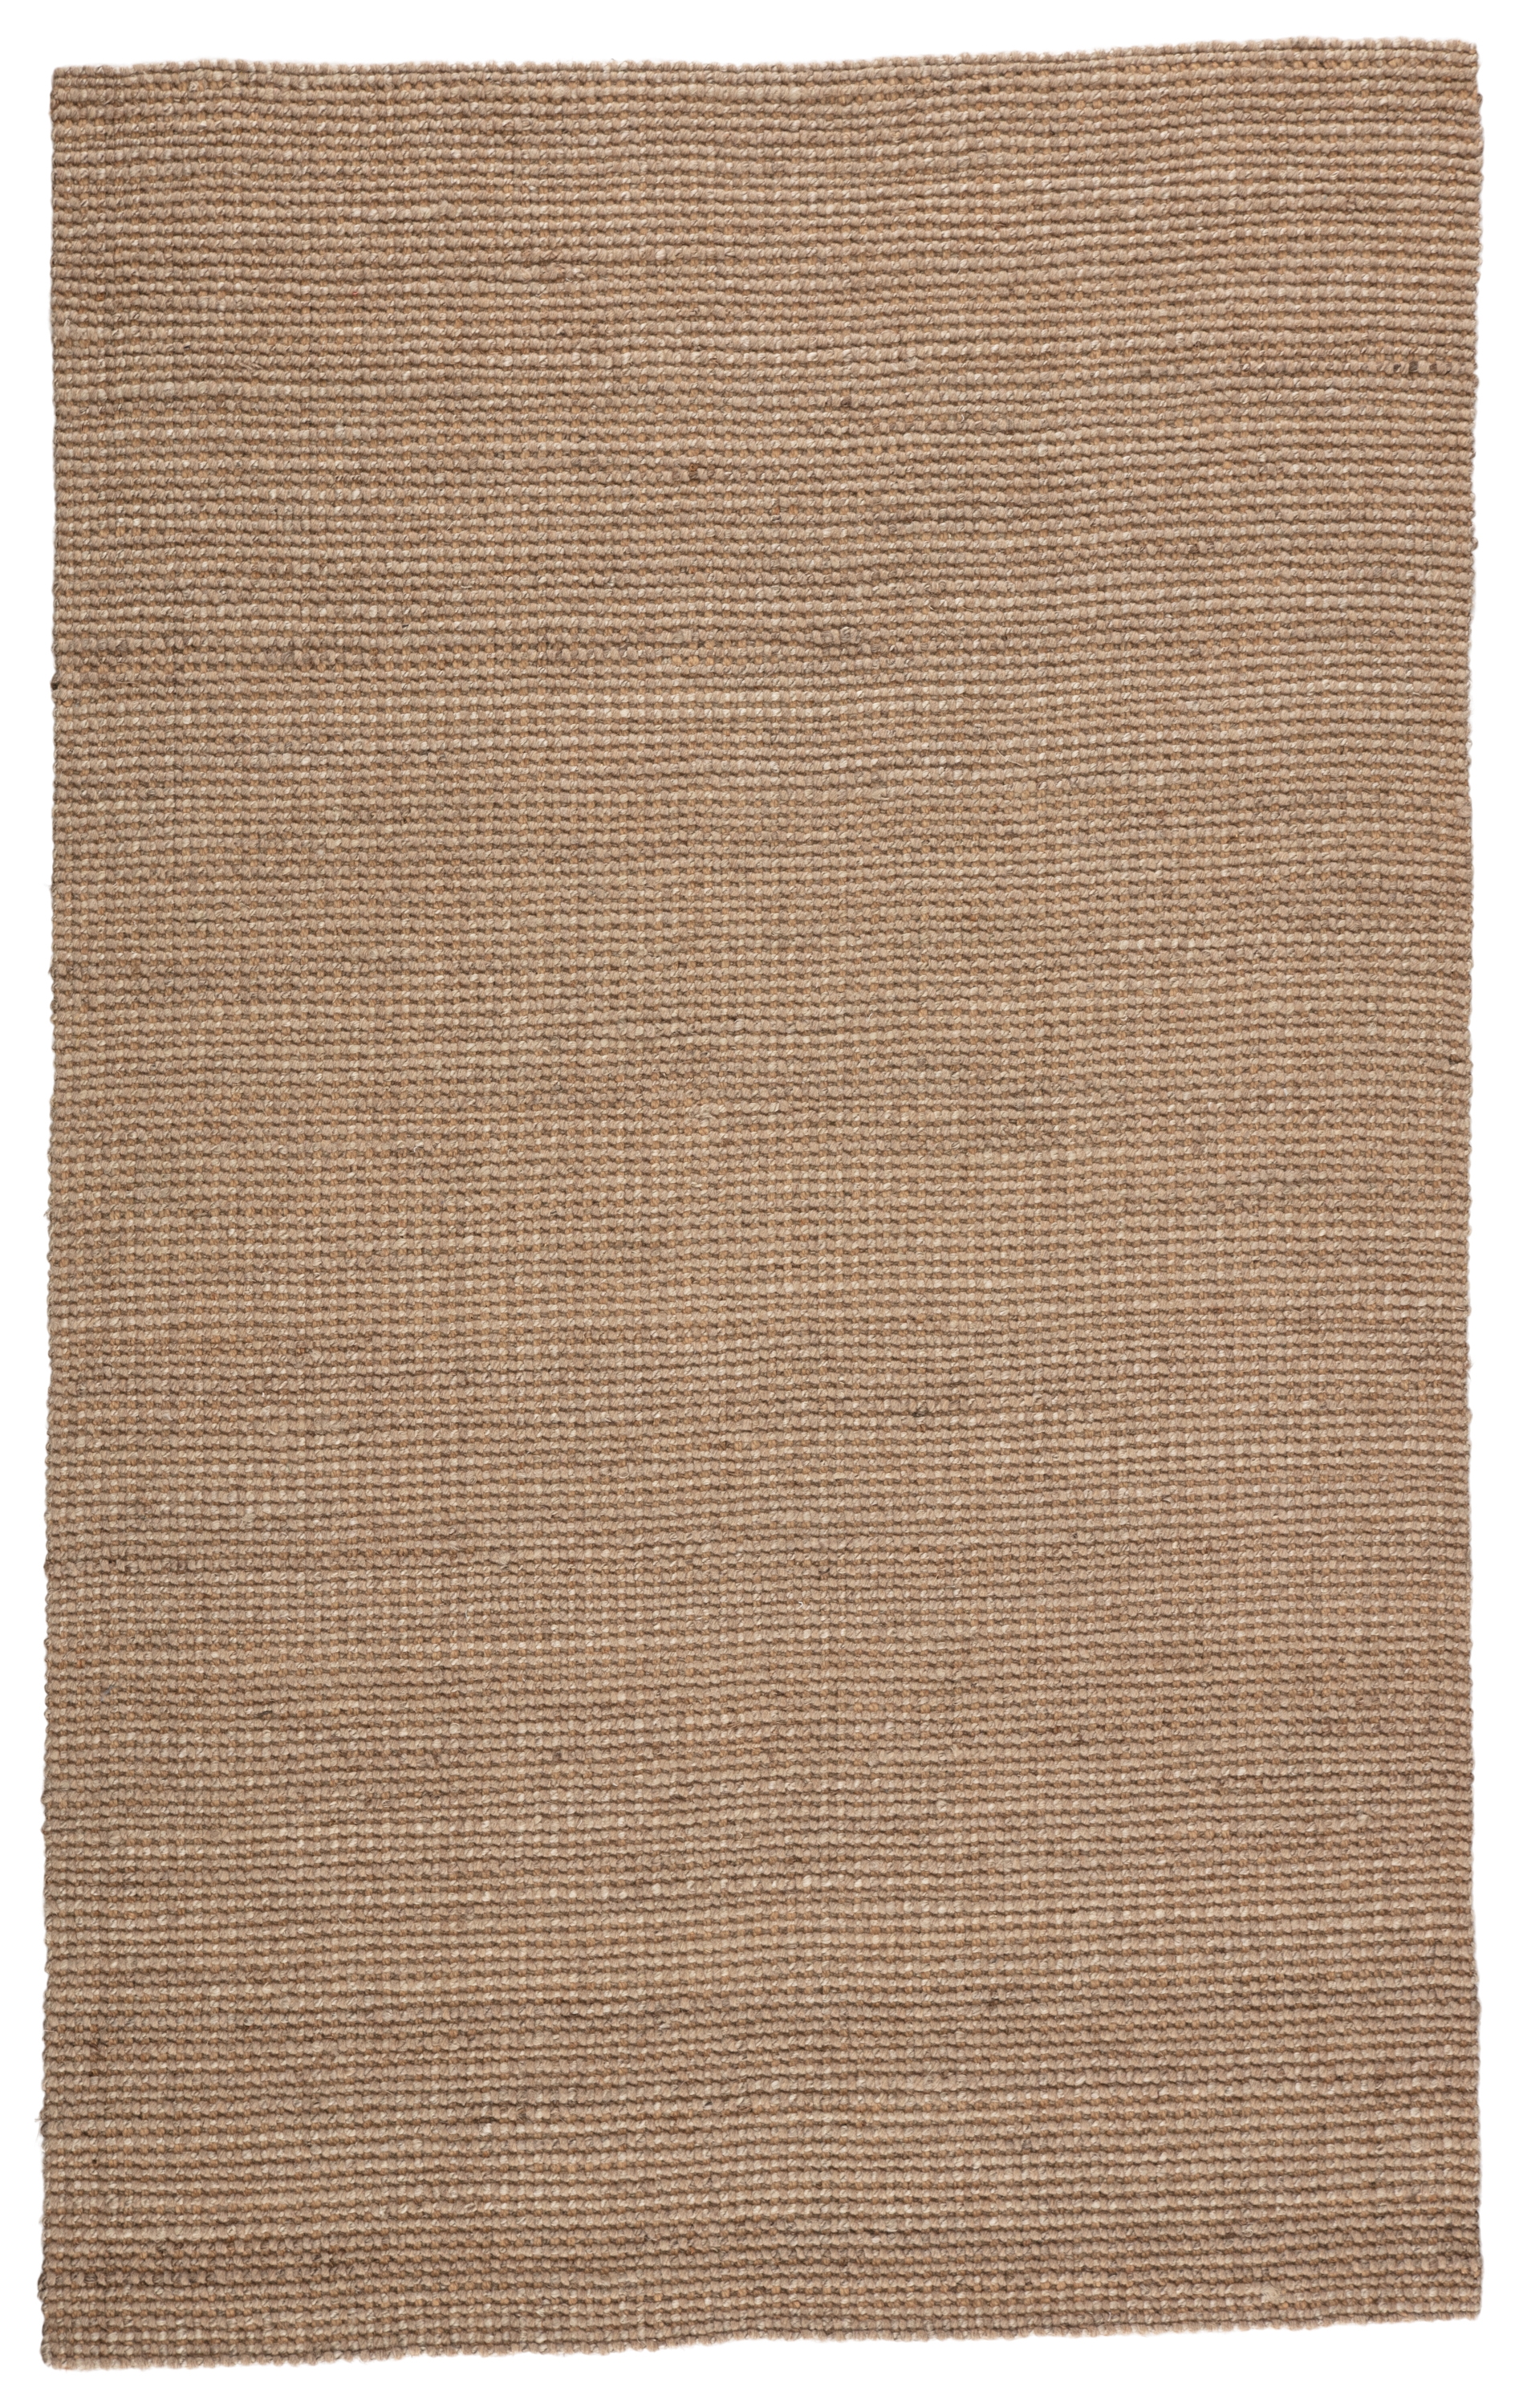 Beech Natural Solid Tan/ Taupe Area Rug (10'X14') - Image 0